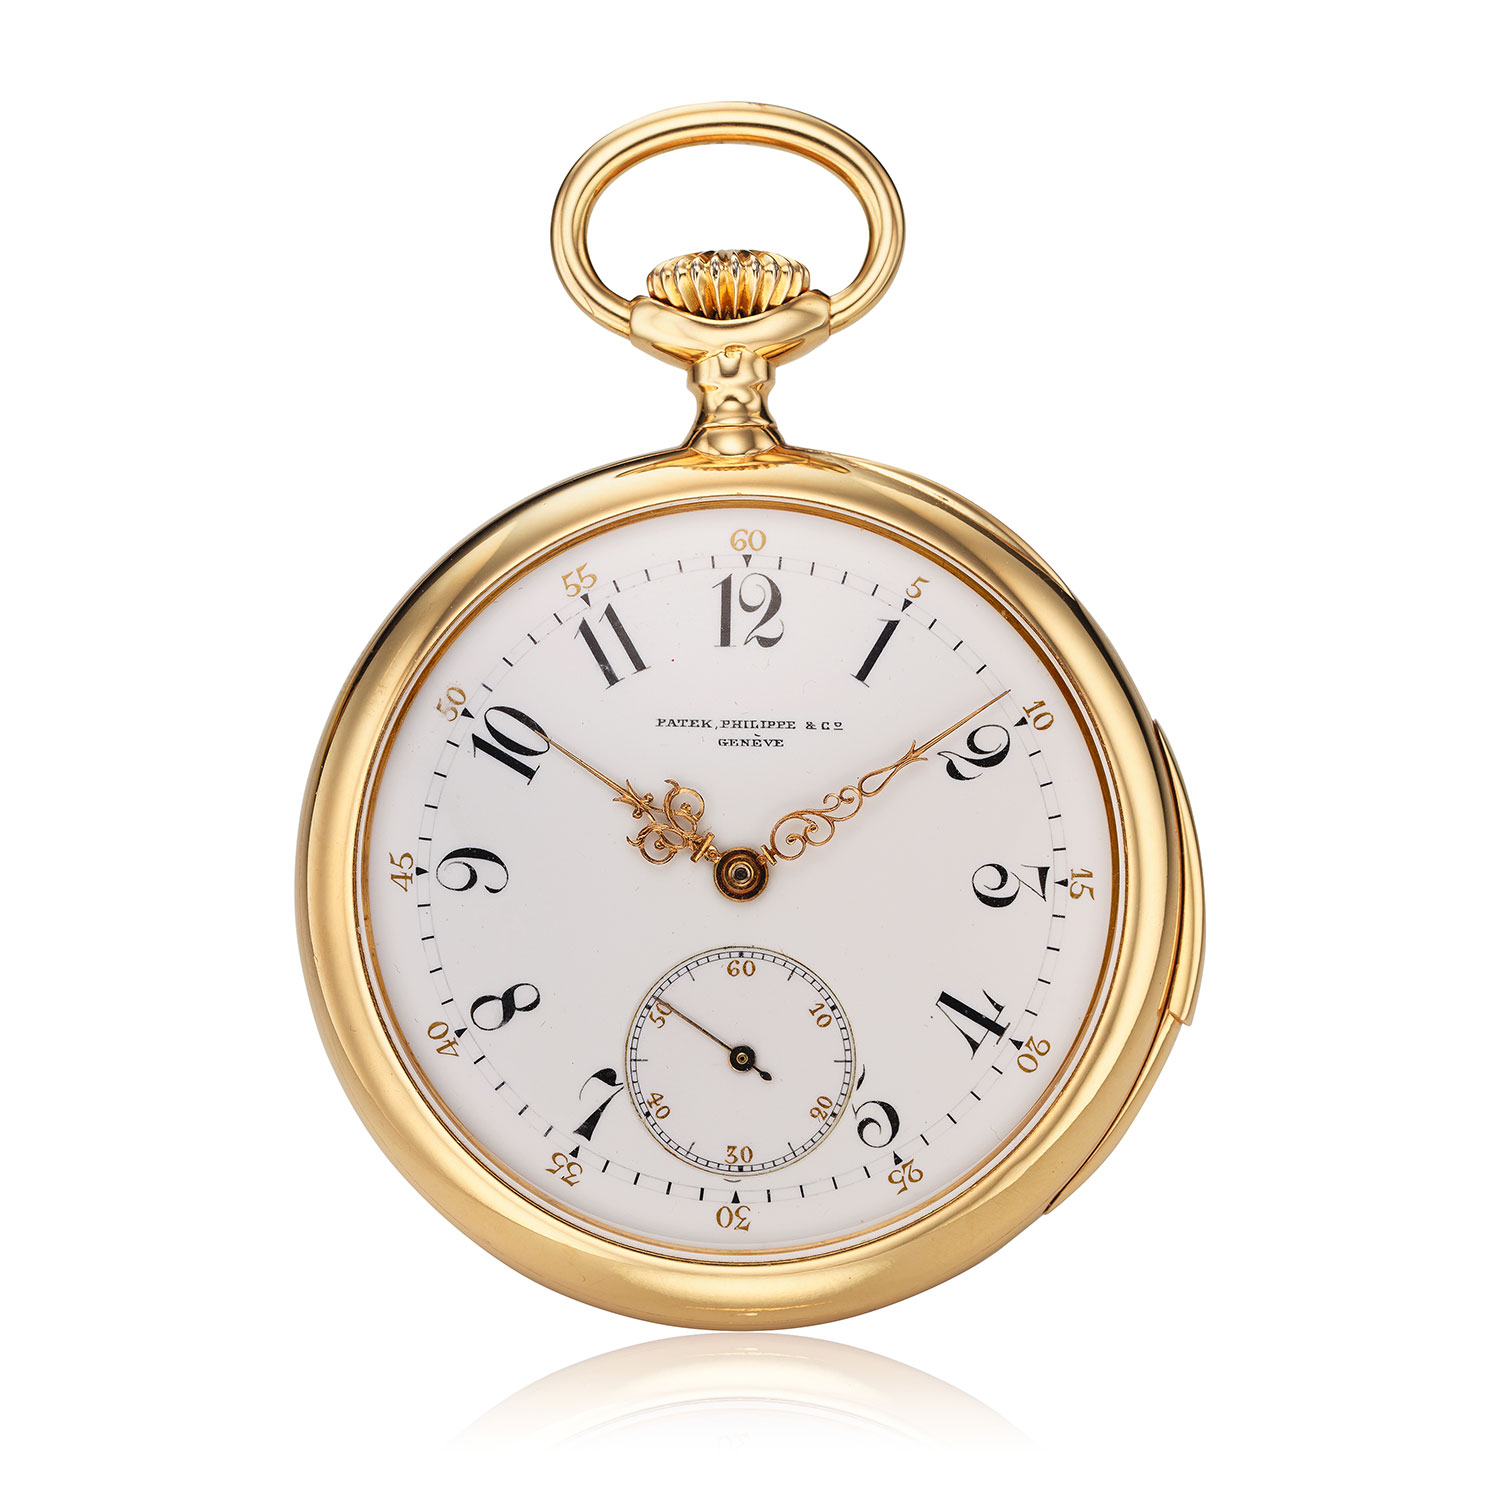 Retailed By Spaulding & Co.: A yellow gold minute repeating